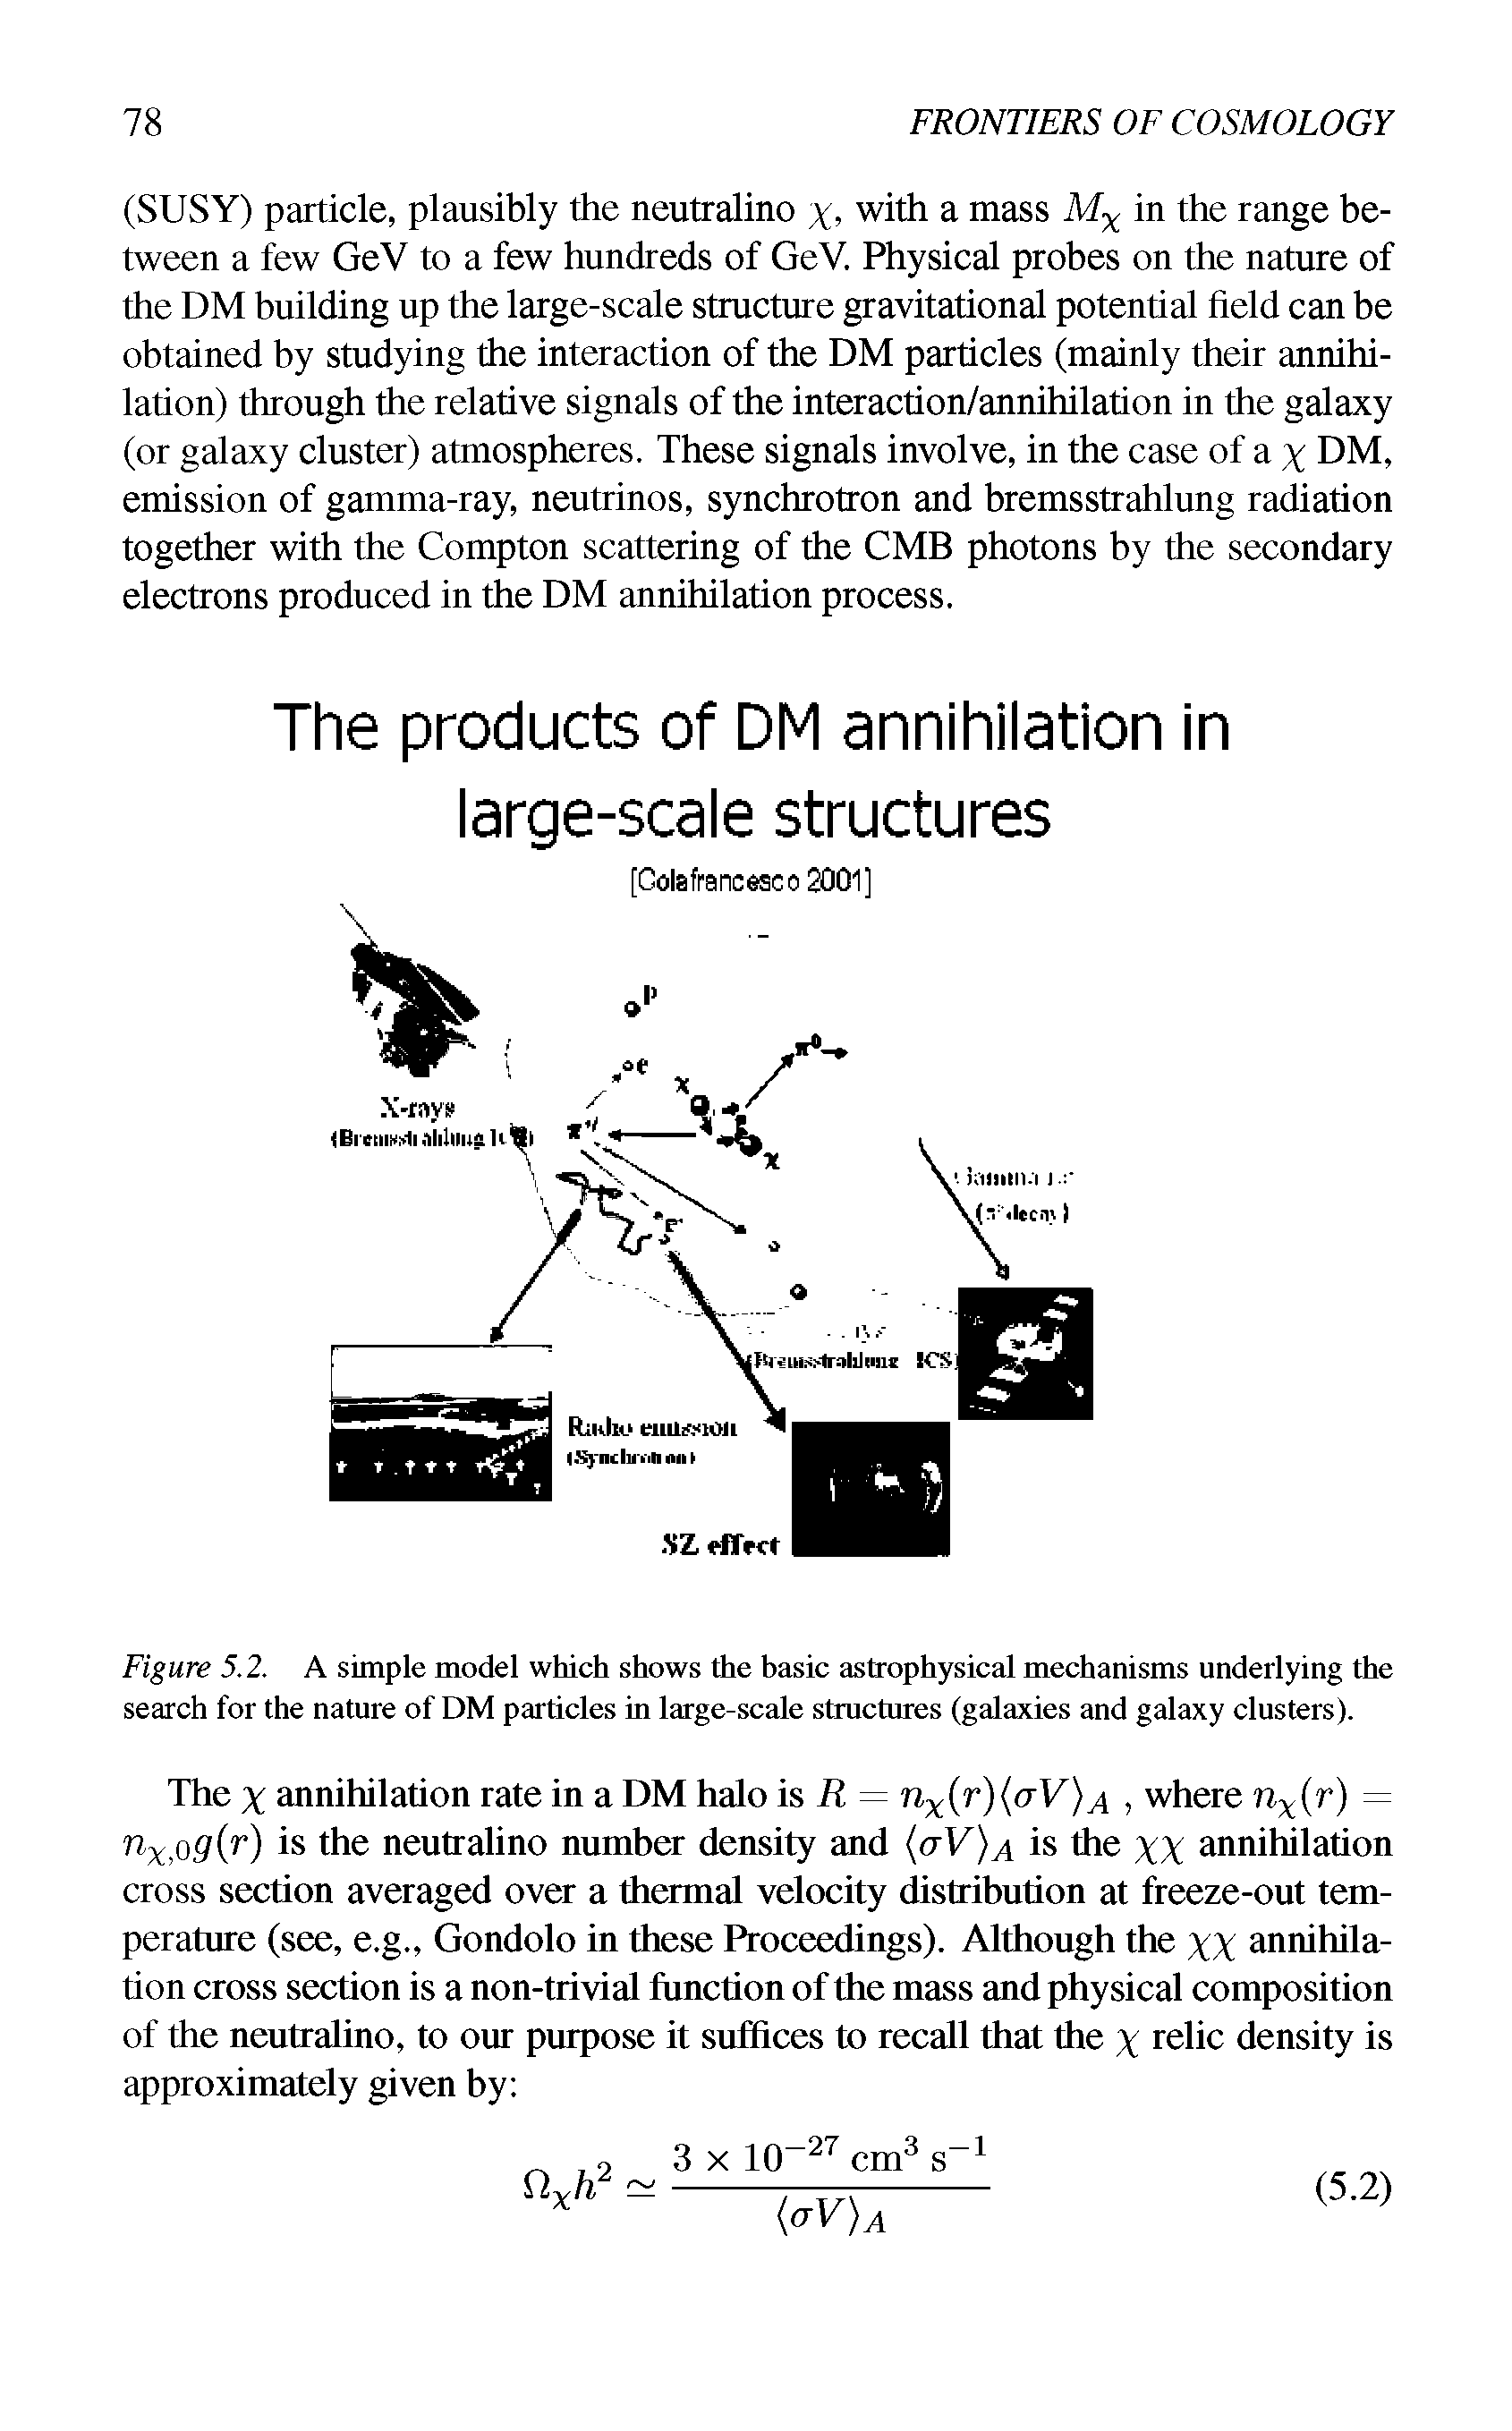 Figure 5.2. A simple model which shows the basic astrophysical mechanisms underlying the search for the nature of DM particles in large-scale structures (galaxies and galaxy clusters).